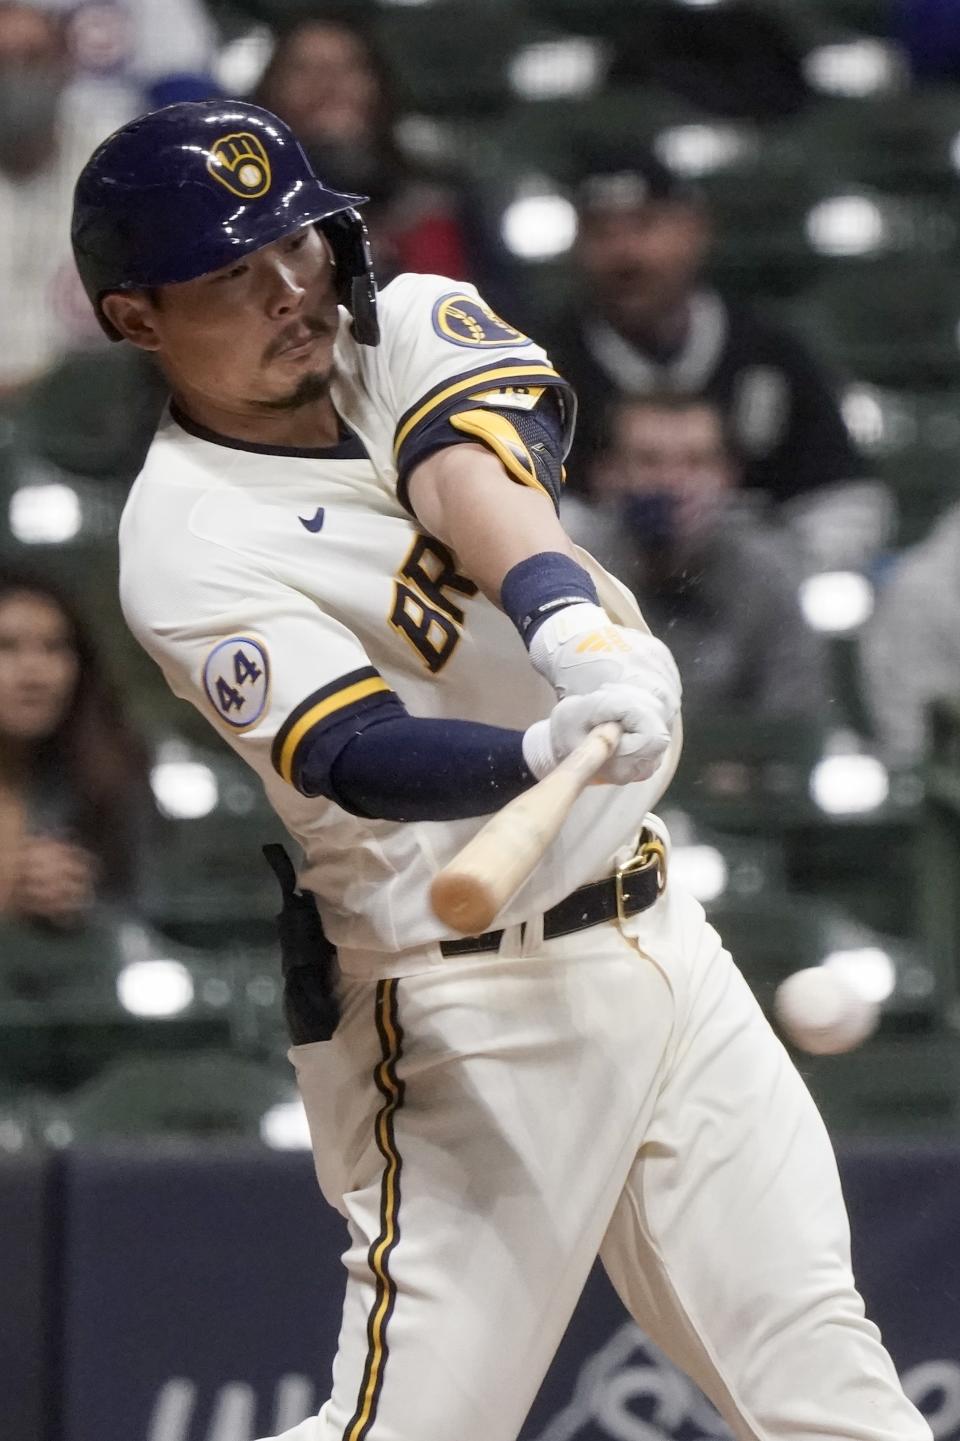 Milwaukee Brewers' Keston Hiura hits an RBI single during the sixth inning of a baseball game against the Chicago Cubs Monday, April 12, 2021, in Milwaukee. (AP Photo/Morry Gash)